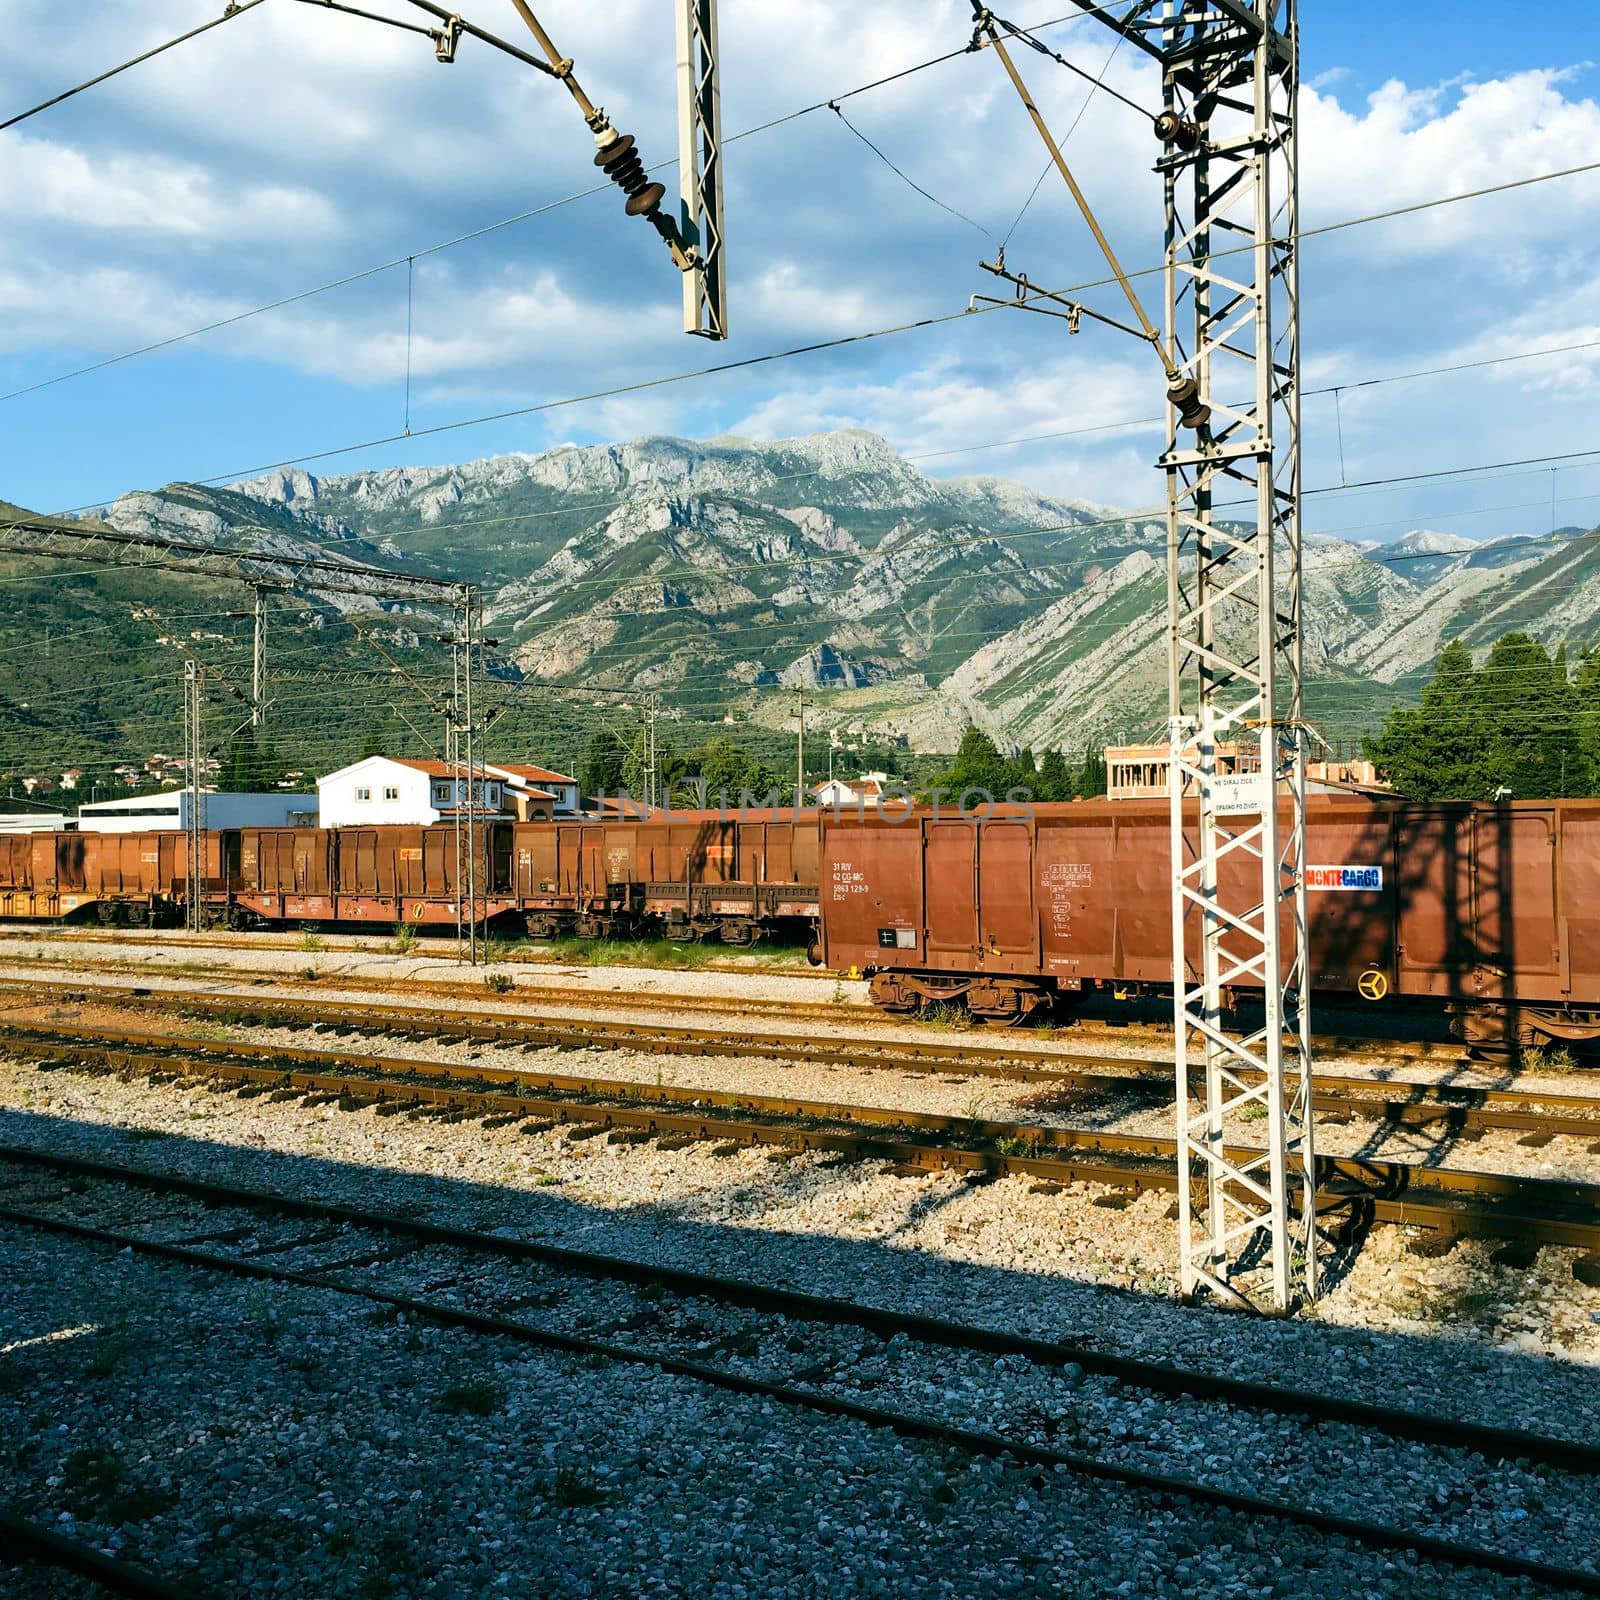 View of a rail yard with mountains in the background and overhead power lines in budvha dubrovnik by WeWander